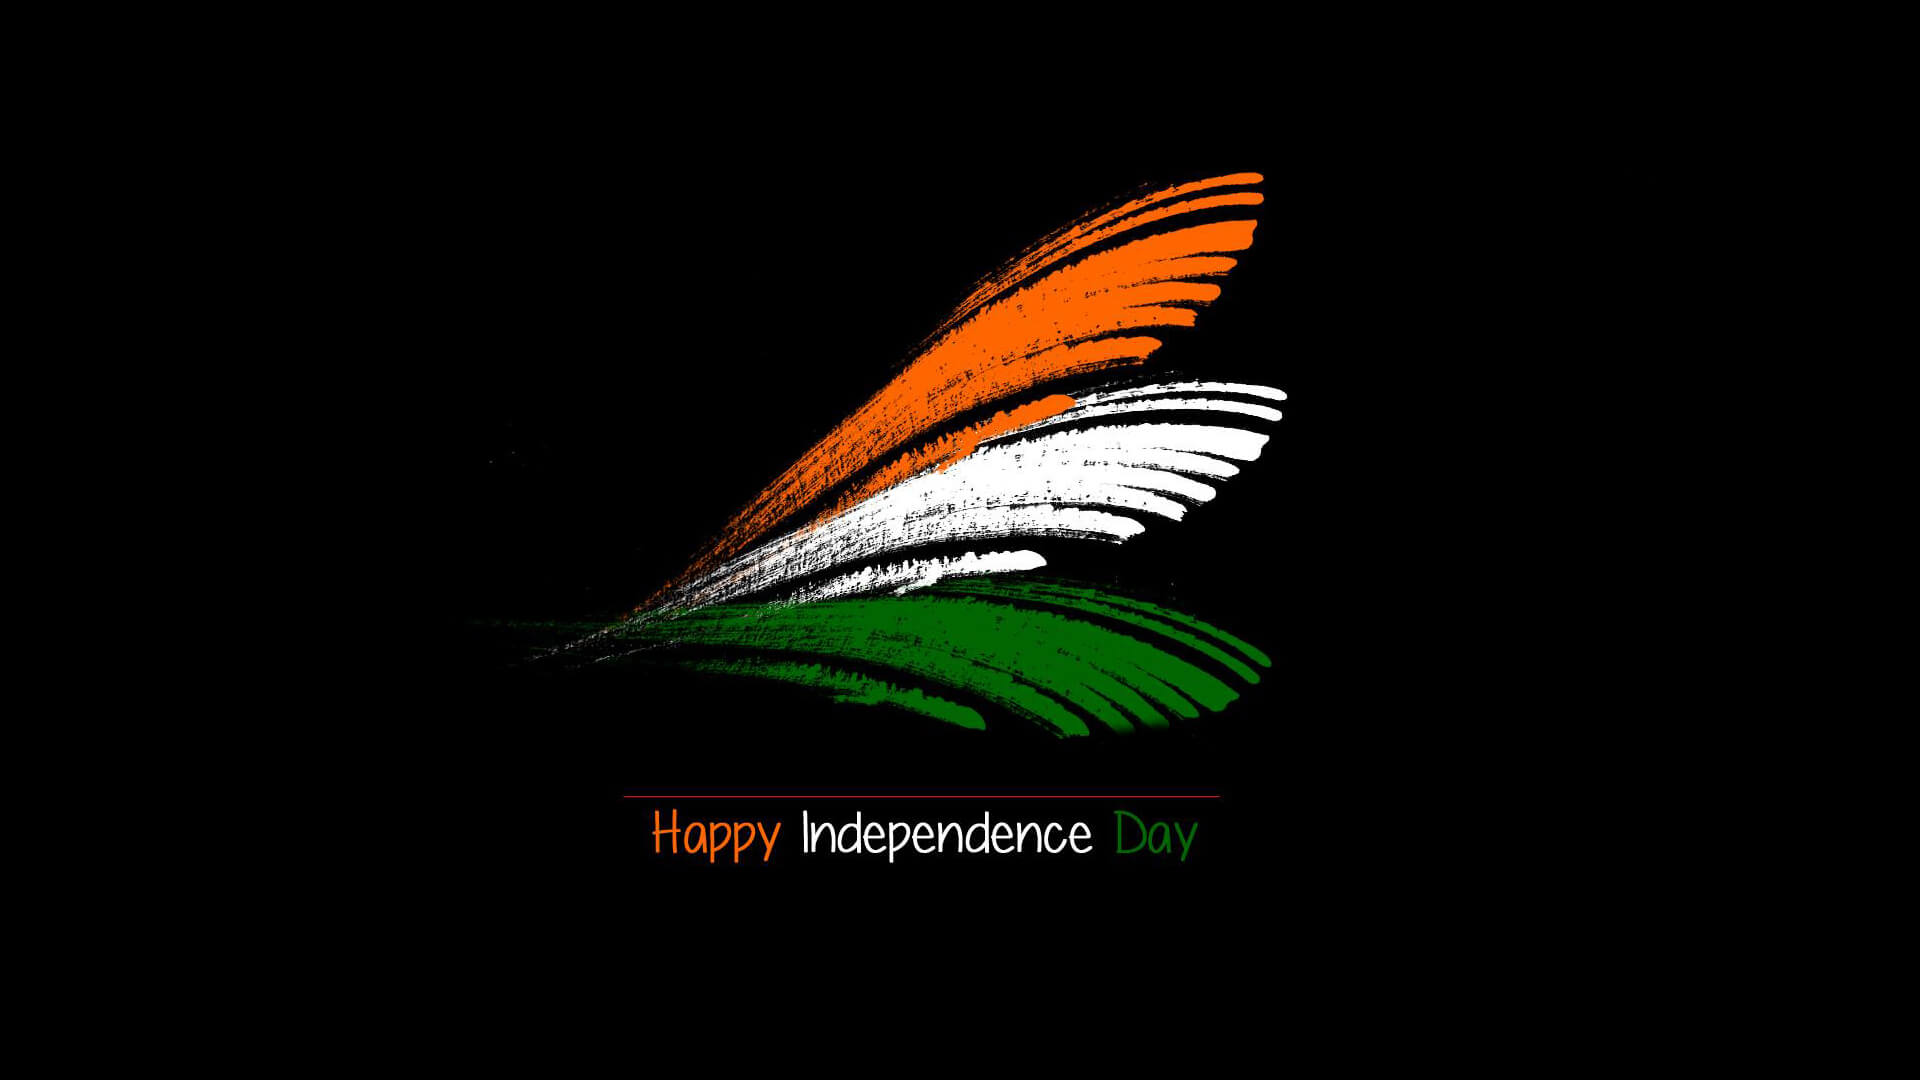 Patriotic Wallpapers And Greetings Independence Day - Indian Flag Black Background - HD Wallpaper 